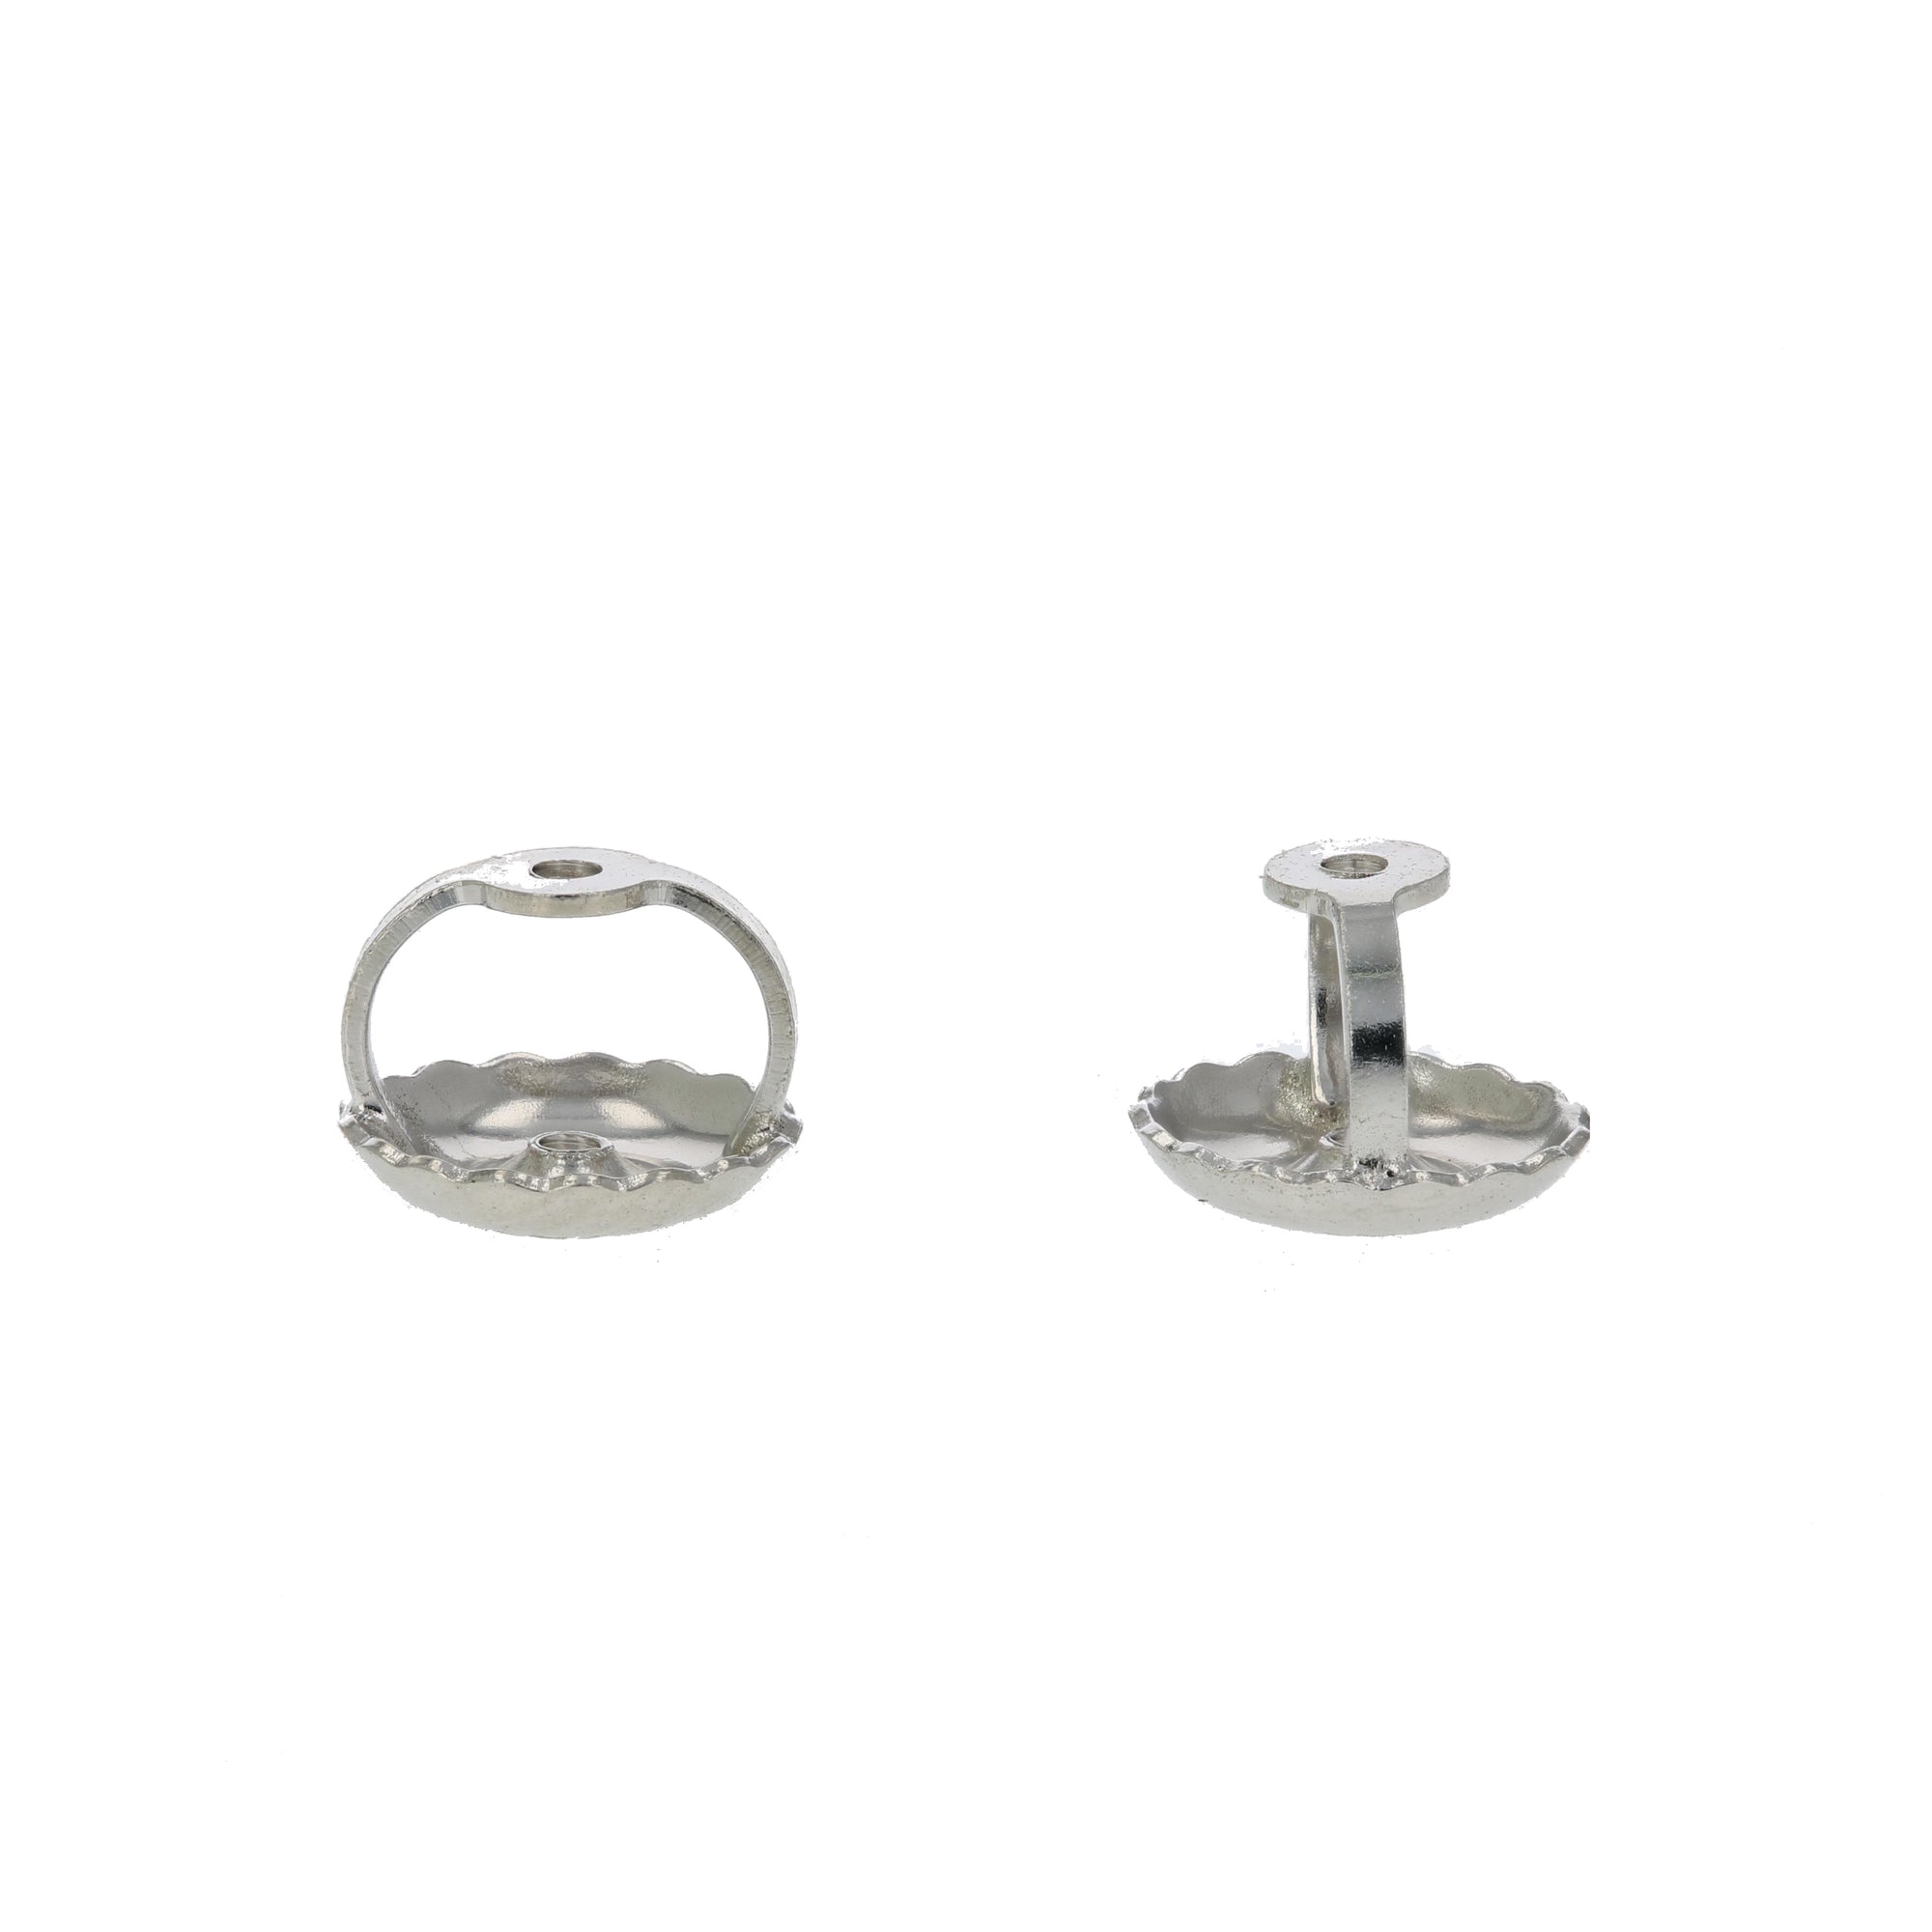 14K White Gold Screw Backs Replacement For Stud Earrings (1 pair)